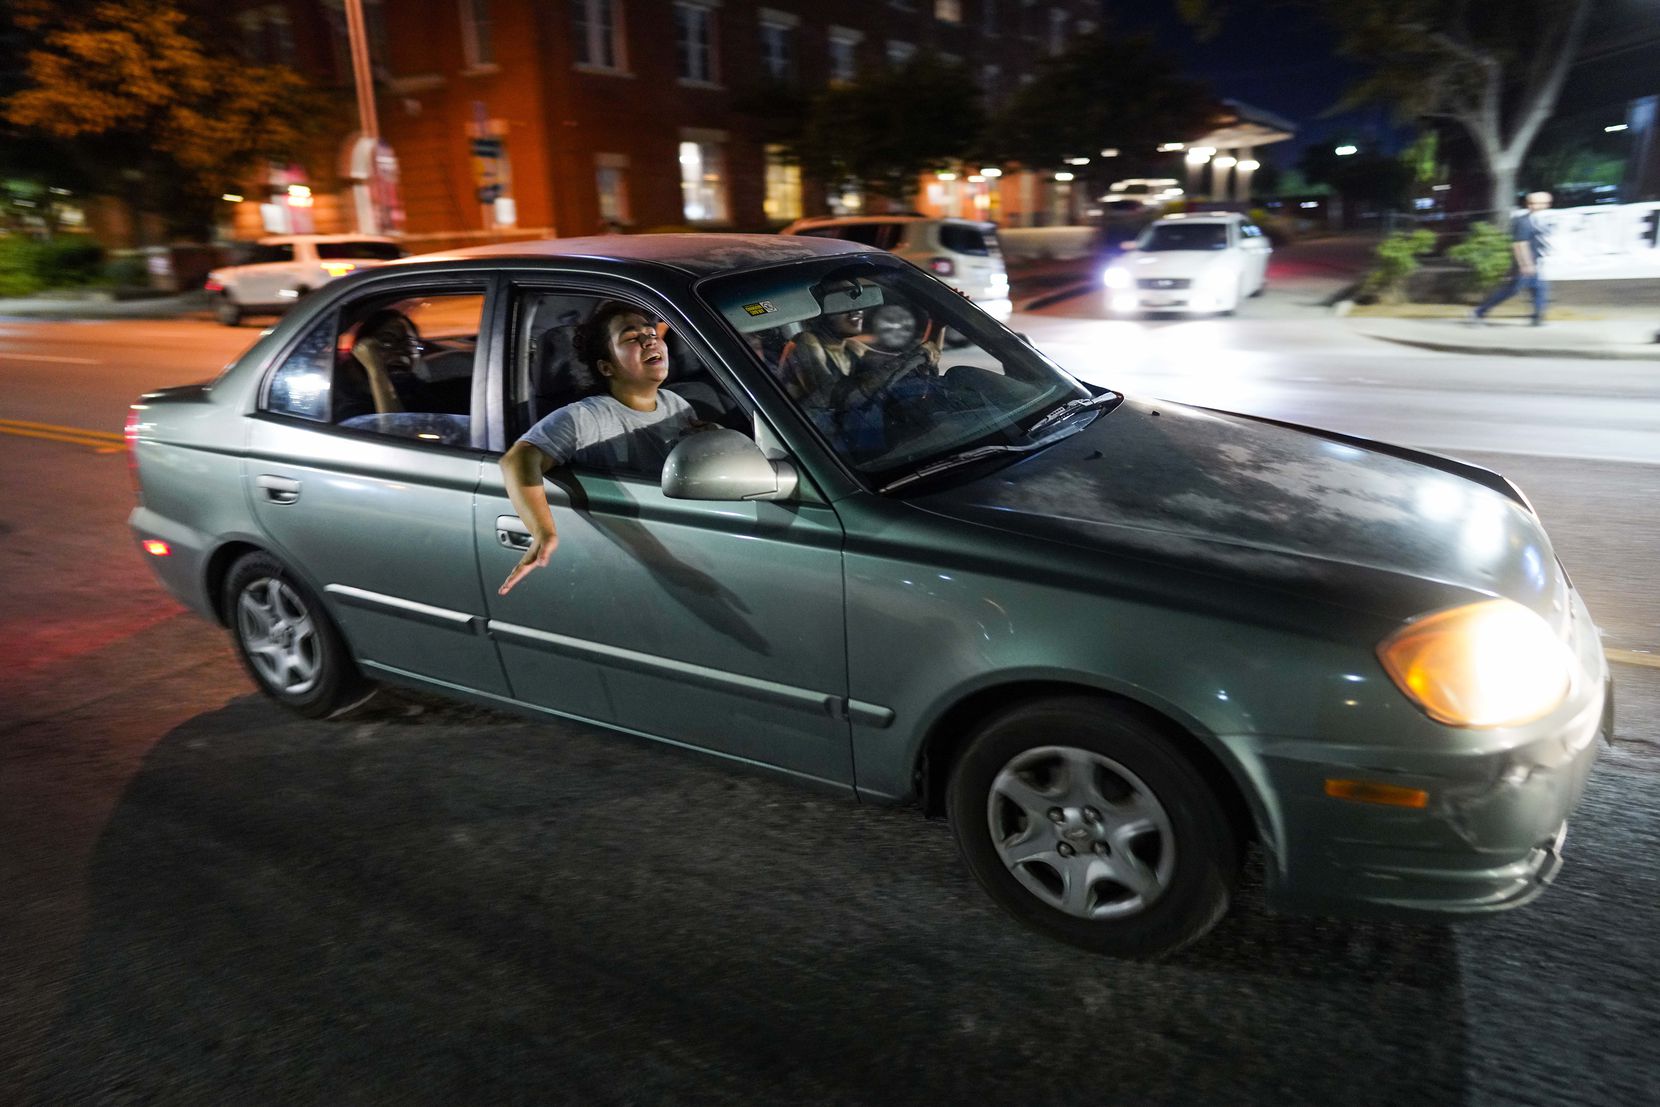 Protesters cheer from cars as they drive near the Dallas Police Headquarters during a...